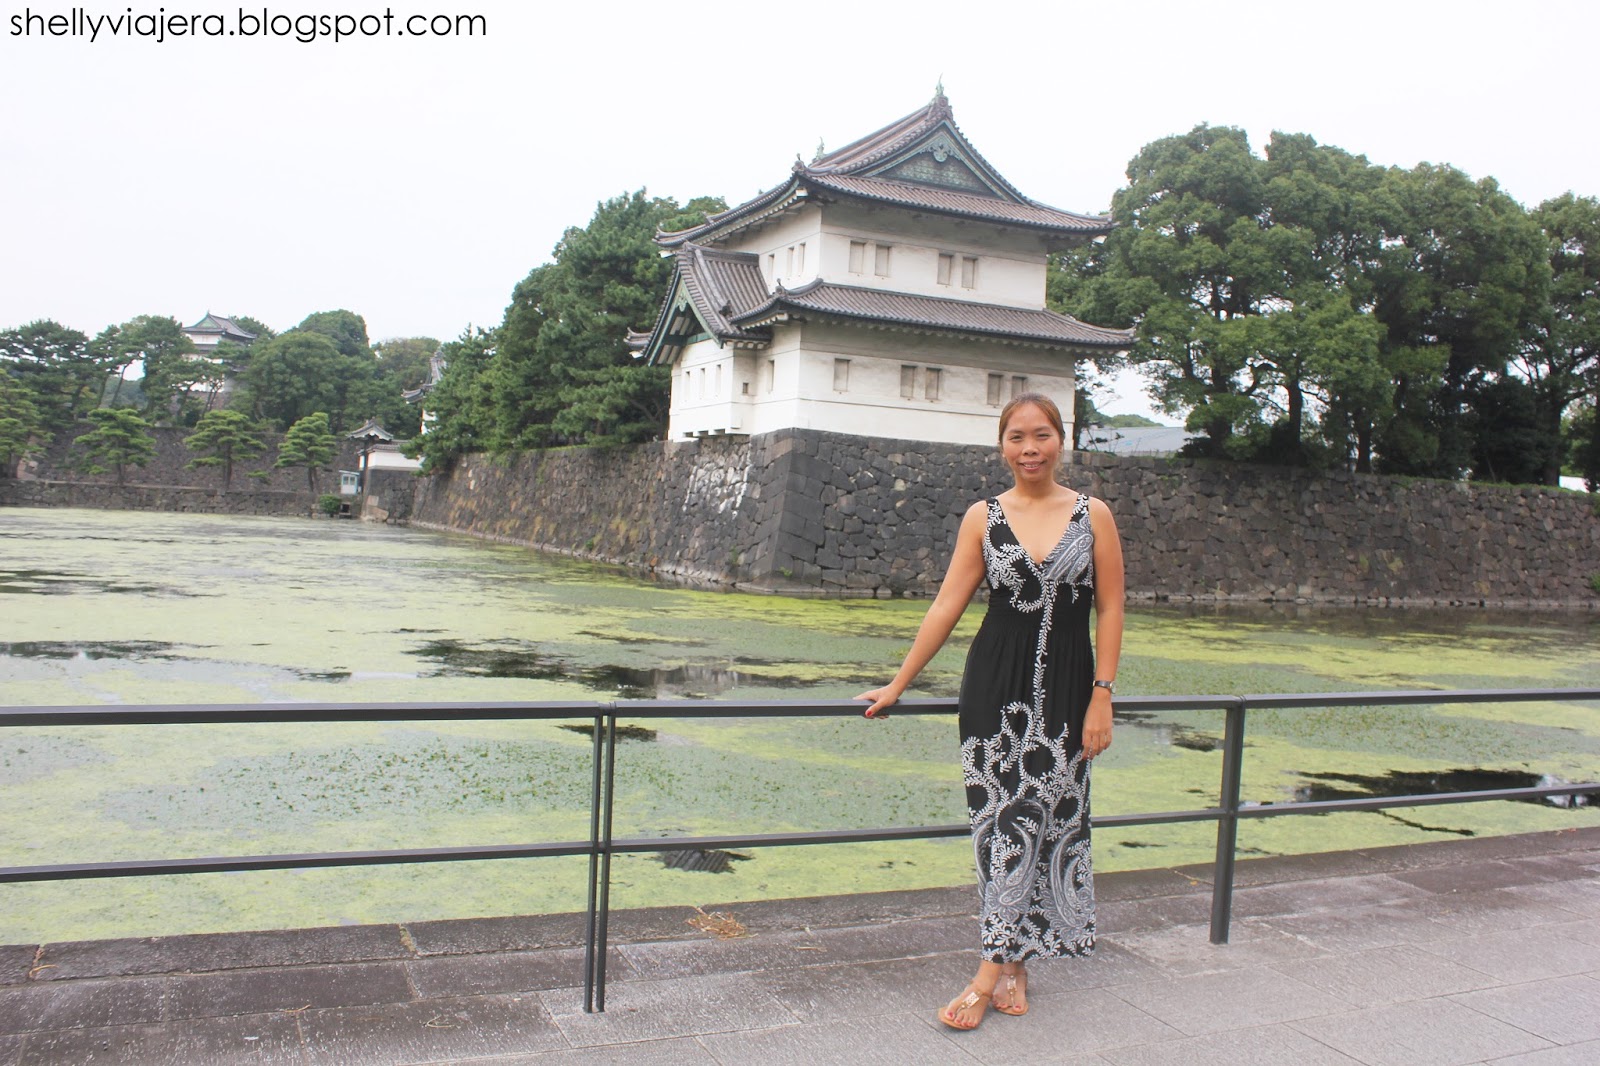 When in Japan: Tokyo Imperial Palace - Shelly Viajera Travel